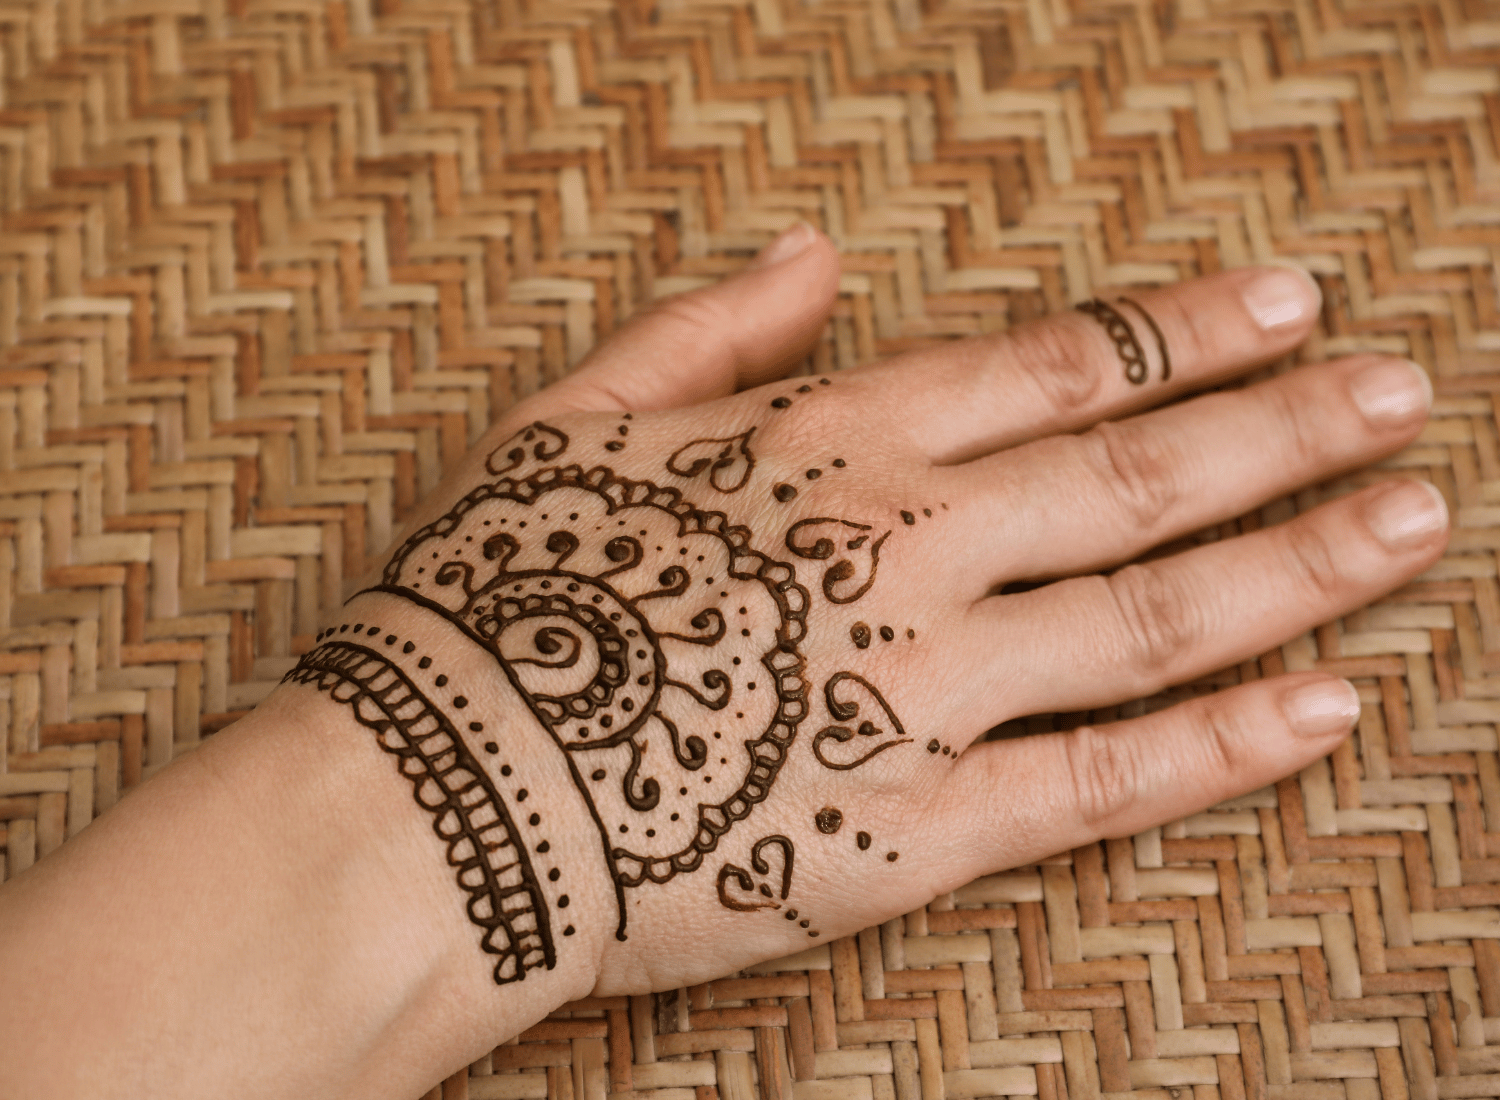 Why is henna/mehndi done for weddings? – Readmyhelp